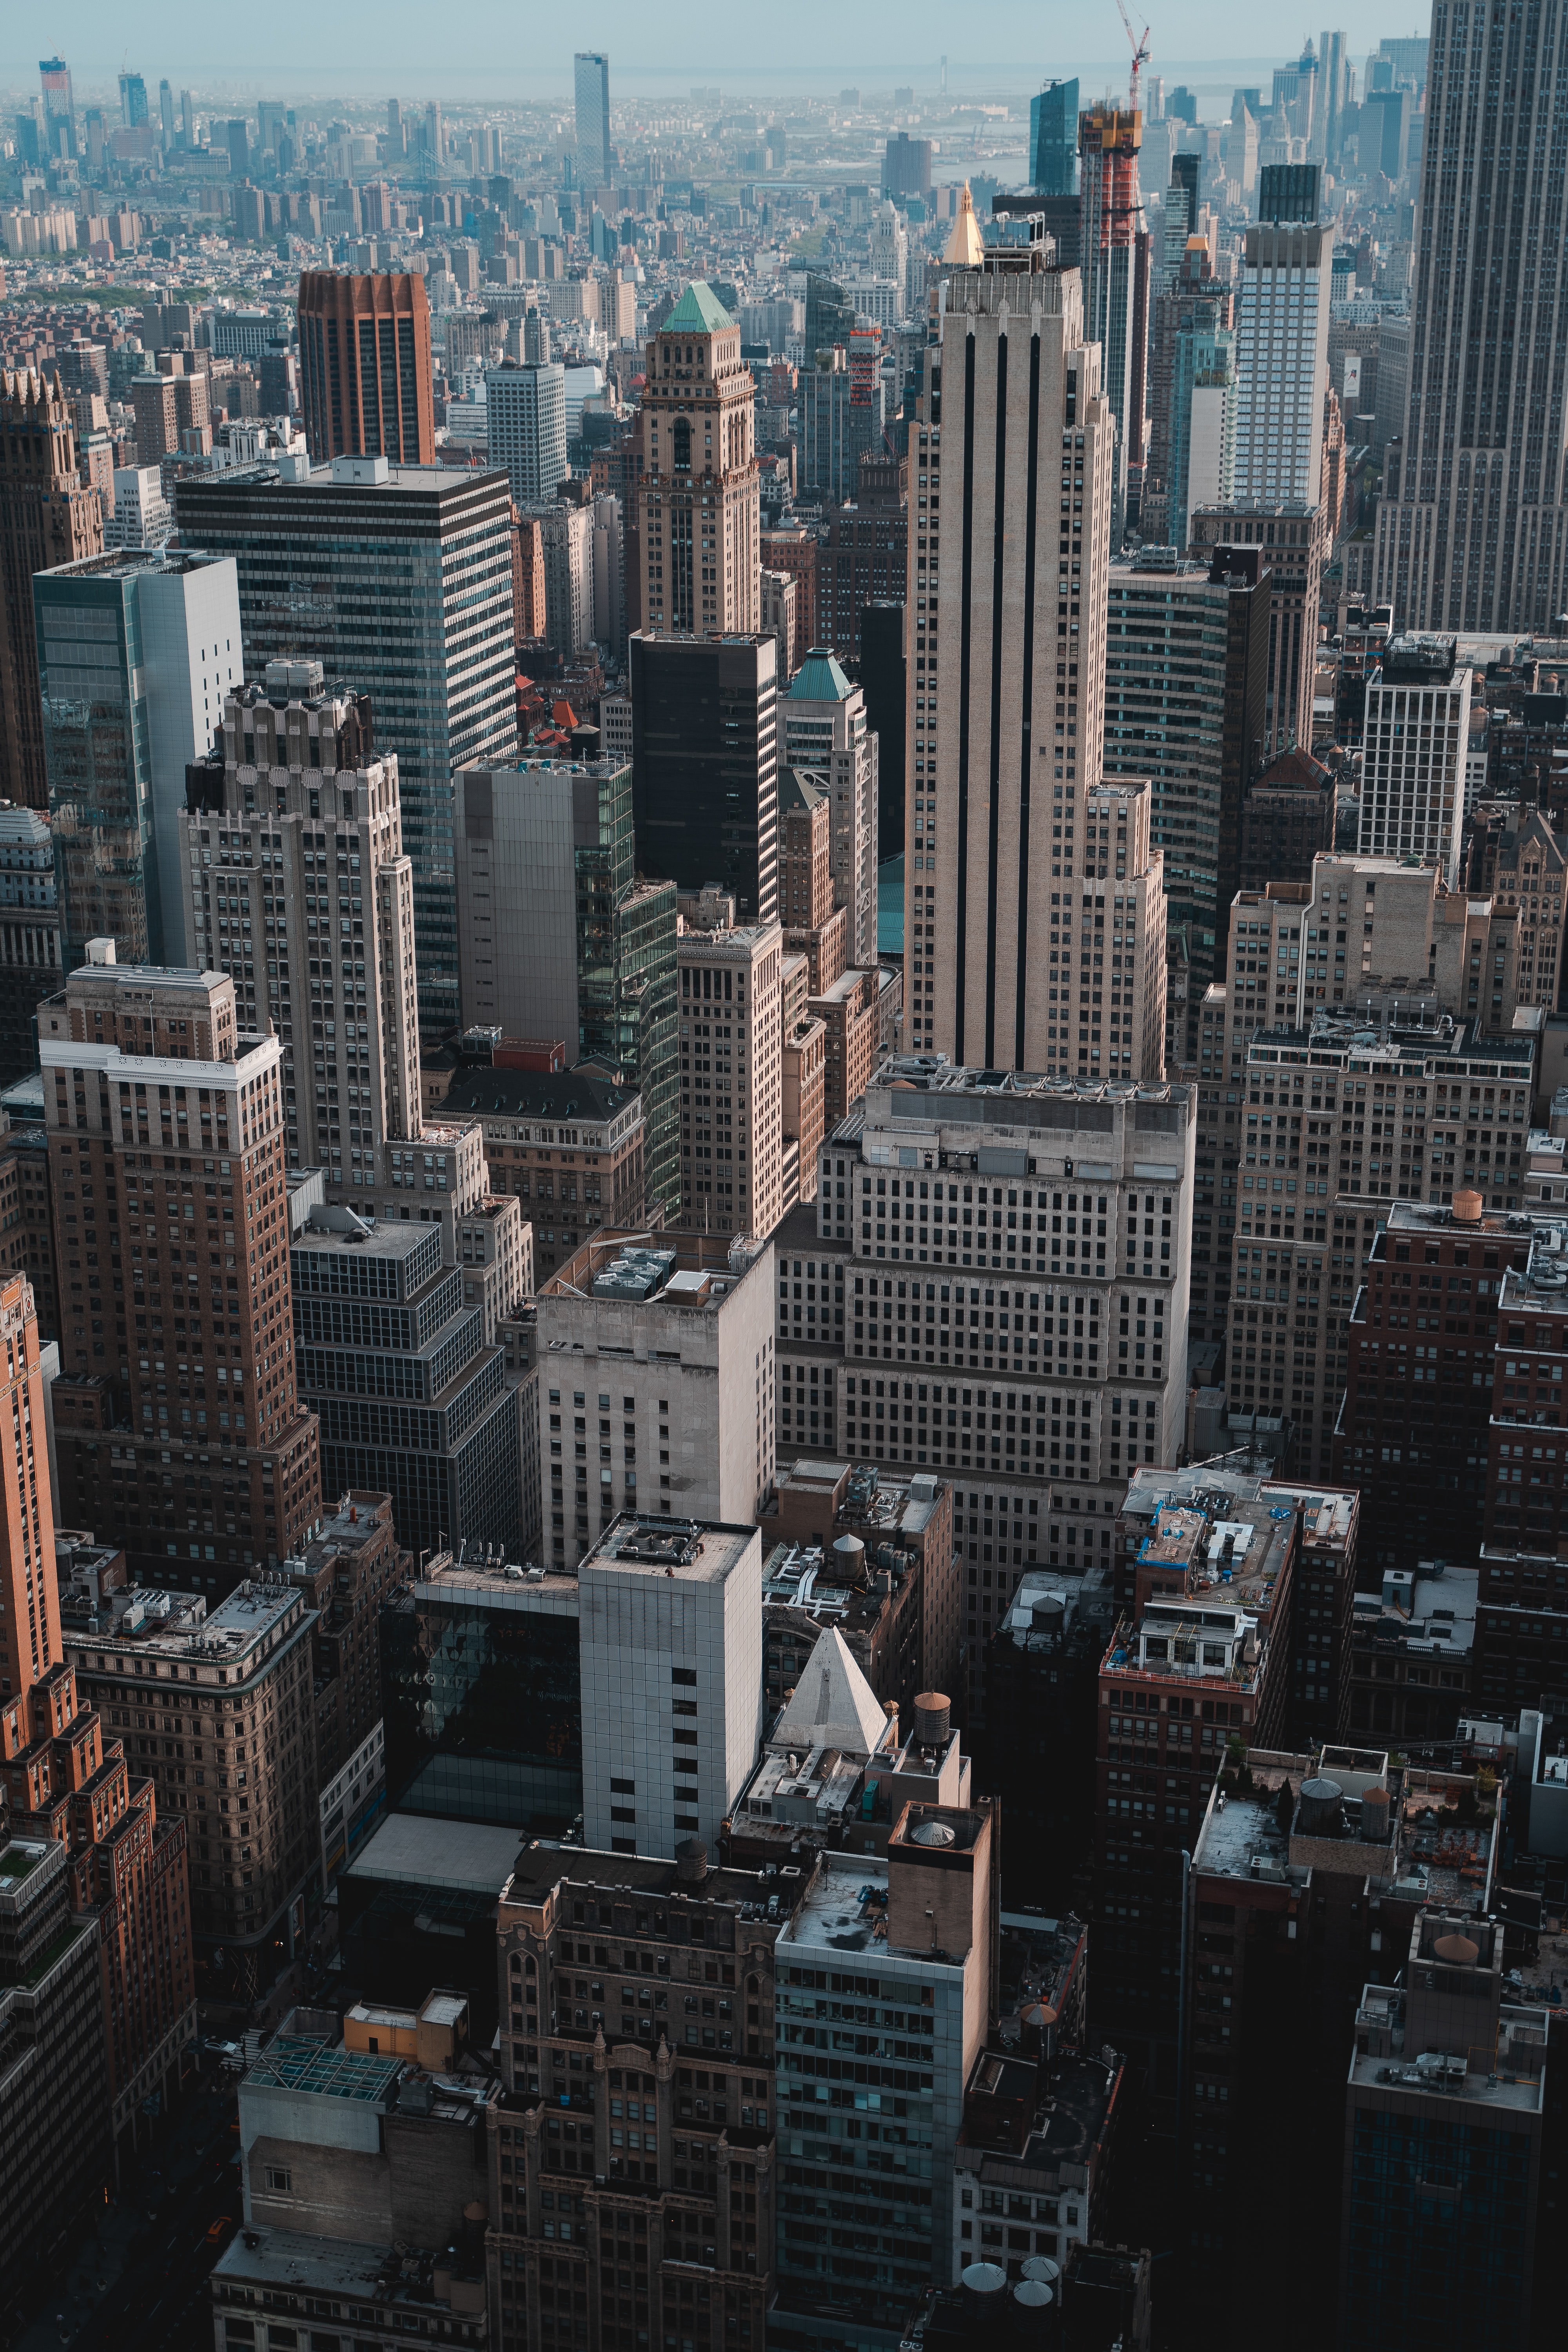 Wallpaper Full HD cities, city, building, view from above, skyscrapers, megapolis, megalopolis